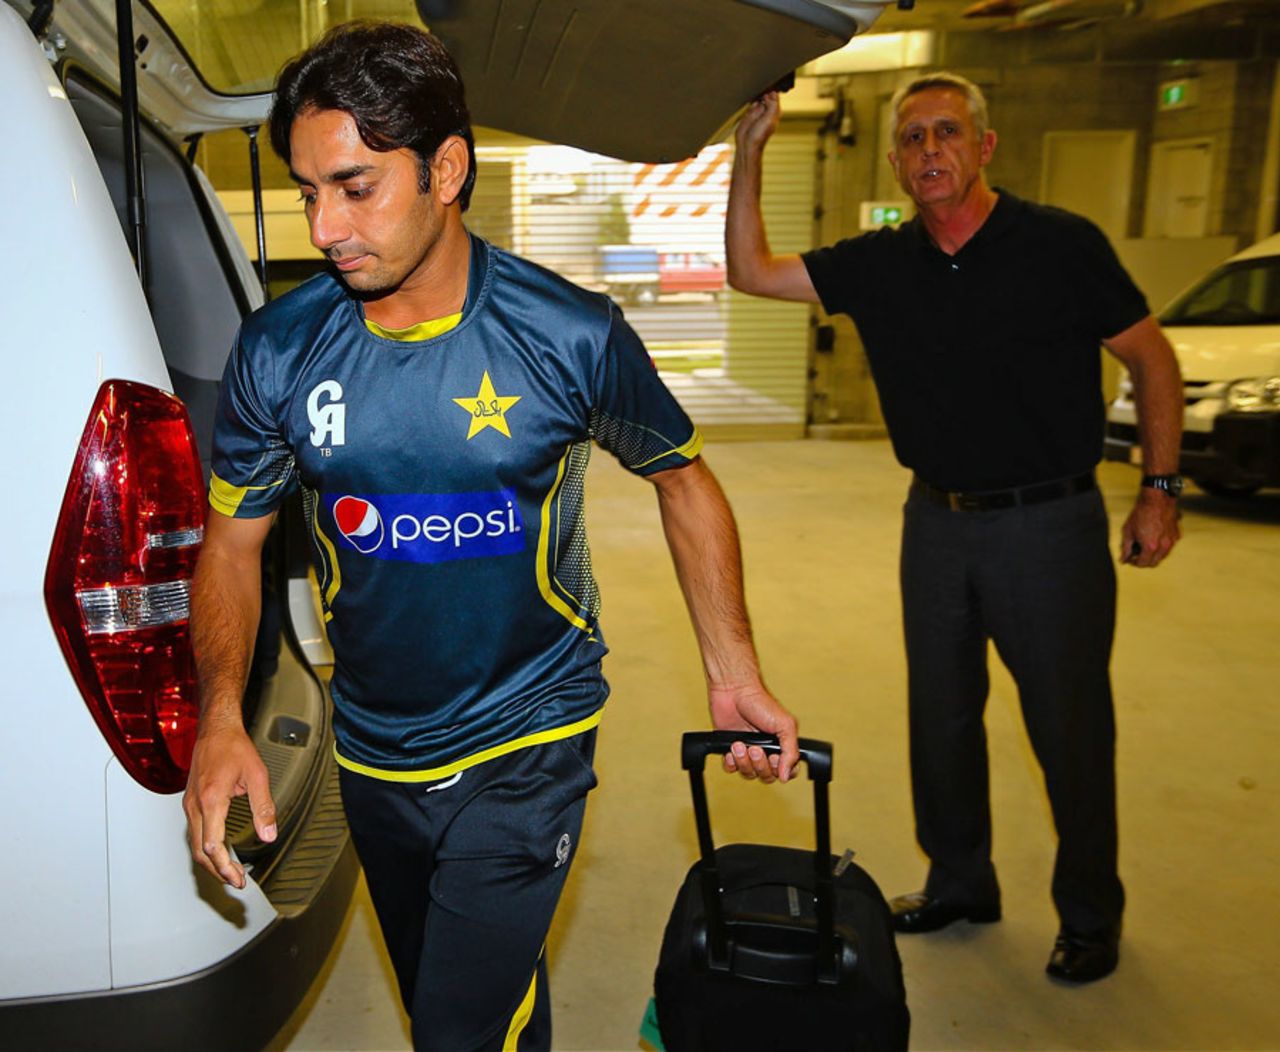 Saeed Ajmal arrives at the National Cricket Centre to have his action tested, Brisbane, August 25, 2014